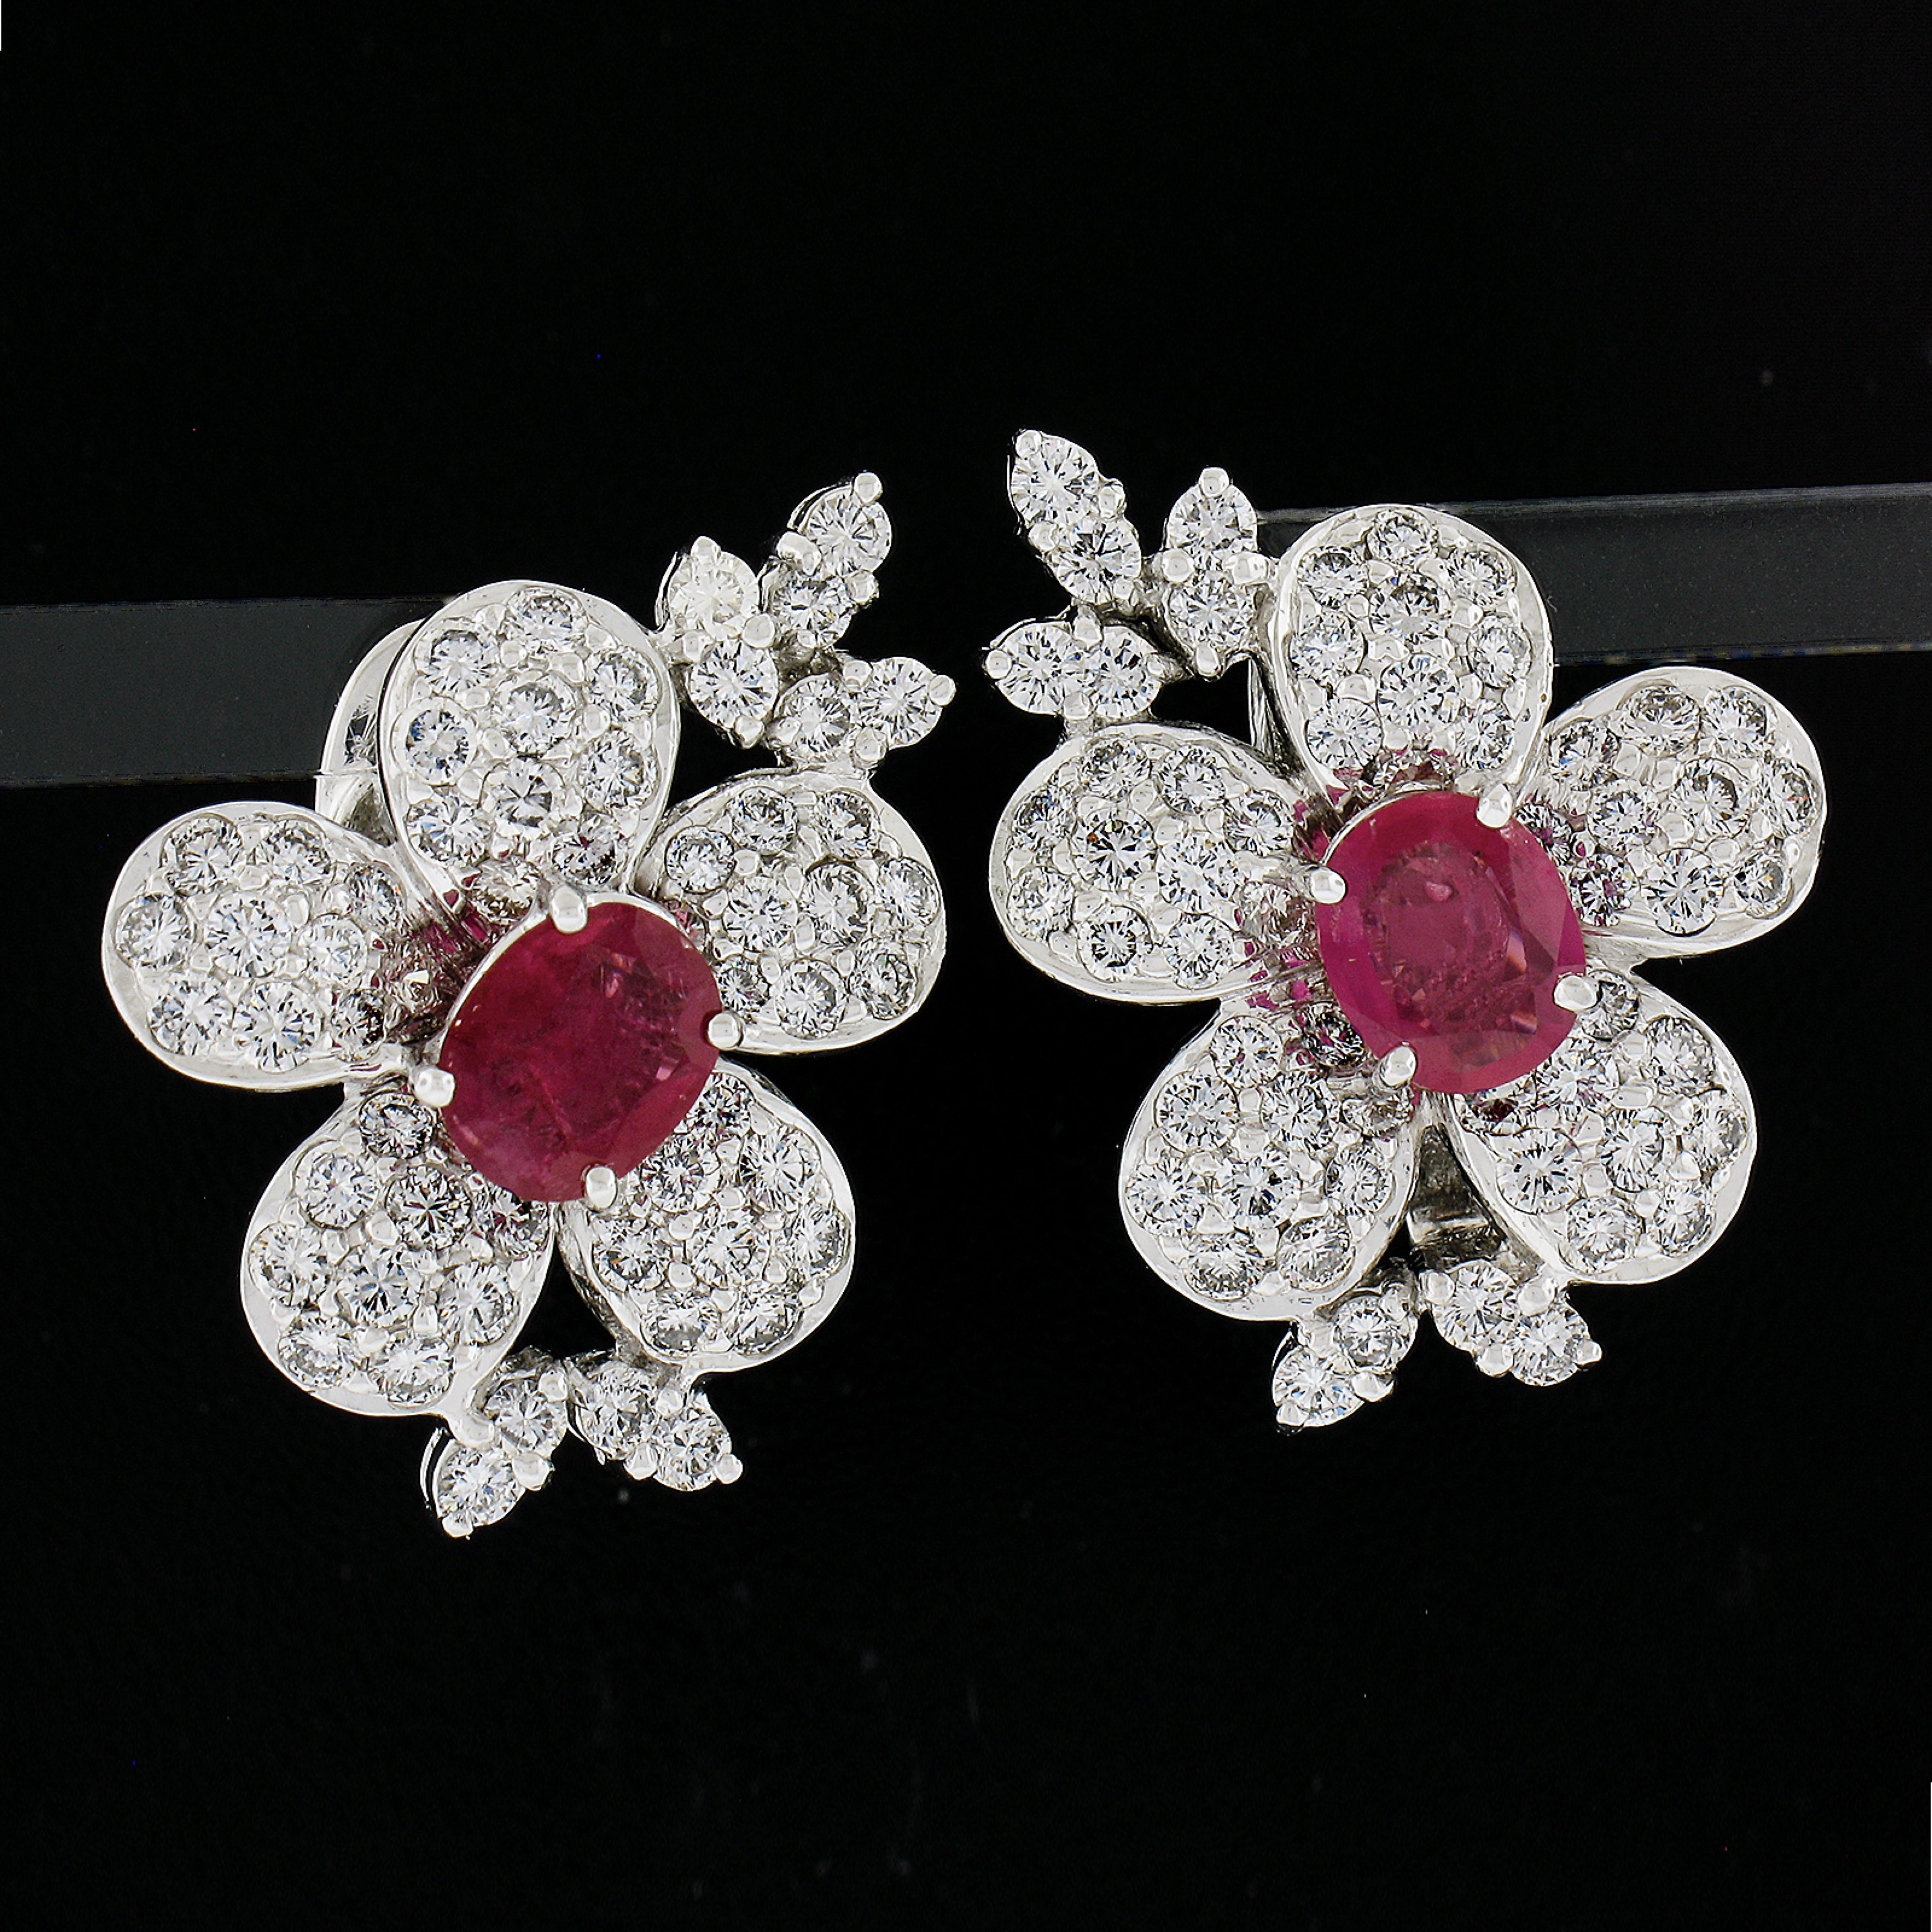 This is an absolutely magnificent pair of vintage flower statement earrings that are very well crafted in solid 18k white gold. Each earring is prong set with a very fine quality, oval brilliant cut ruby at its center. The GIA certified rubies total